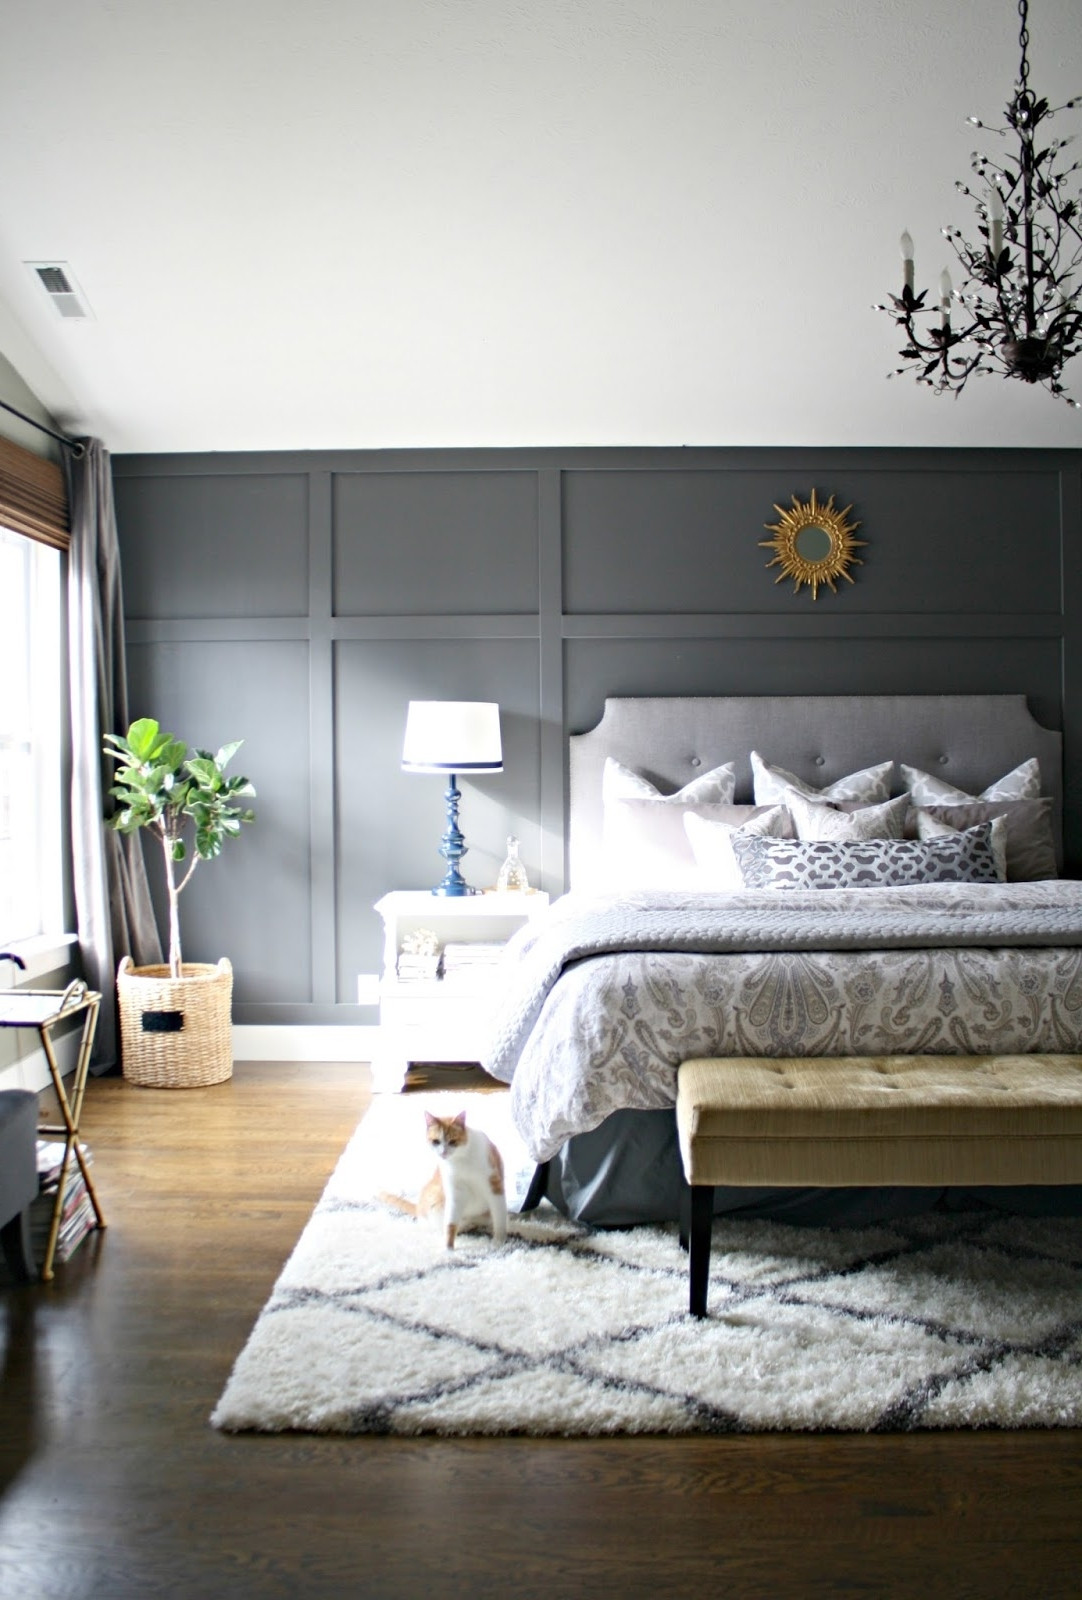 Wooden Accent Wall Bedroom
 15 Ideas of Wallpaper Bedroom Wall Accents